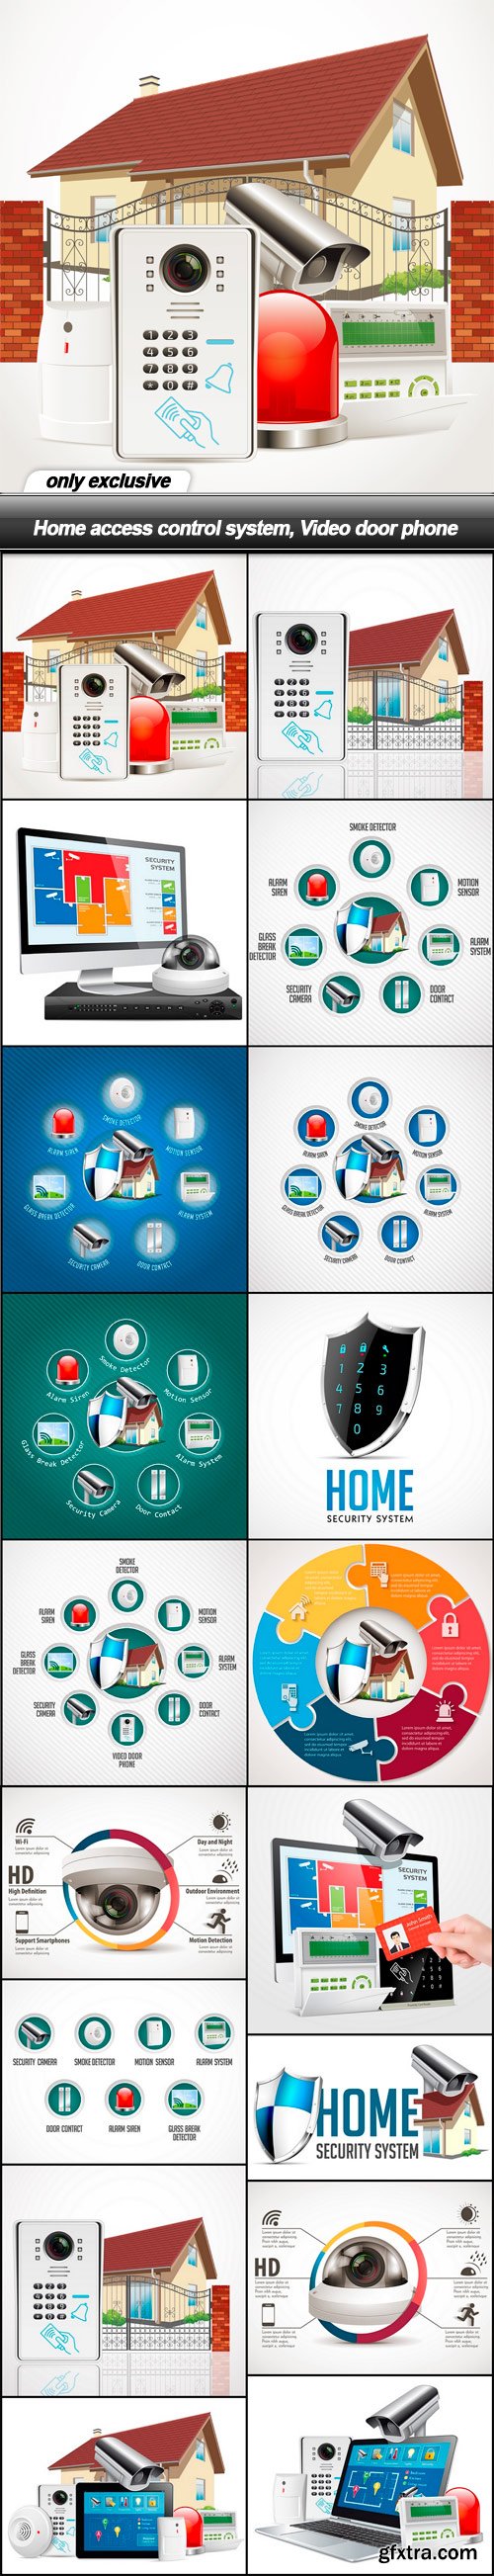 Home access control system, Video door phone - 18 EPS